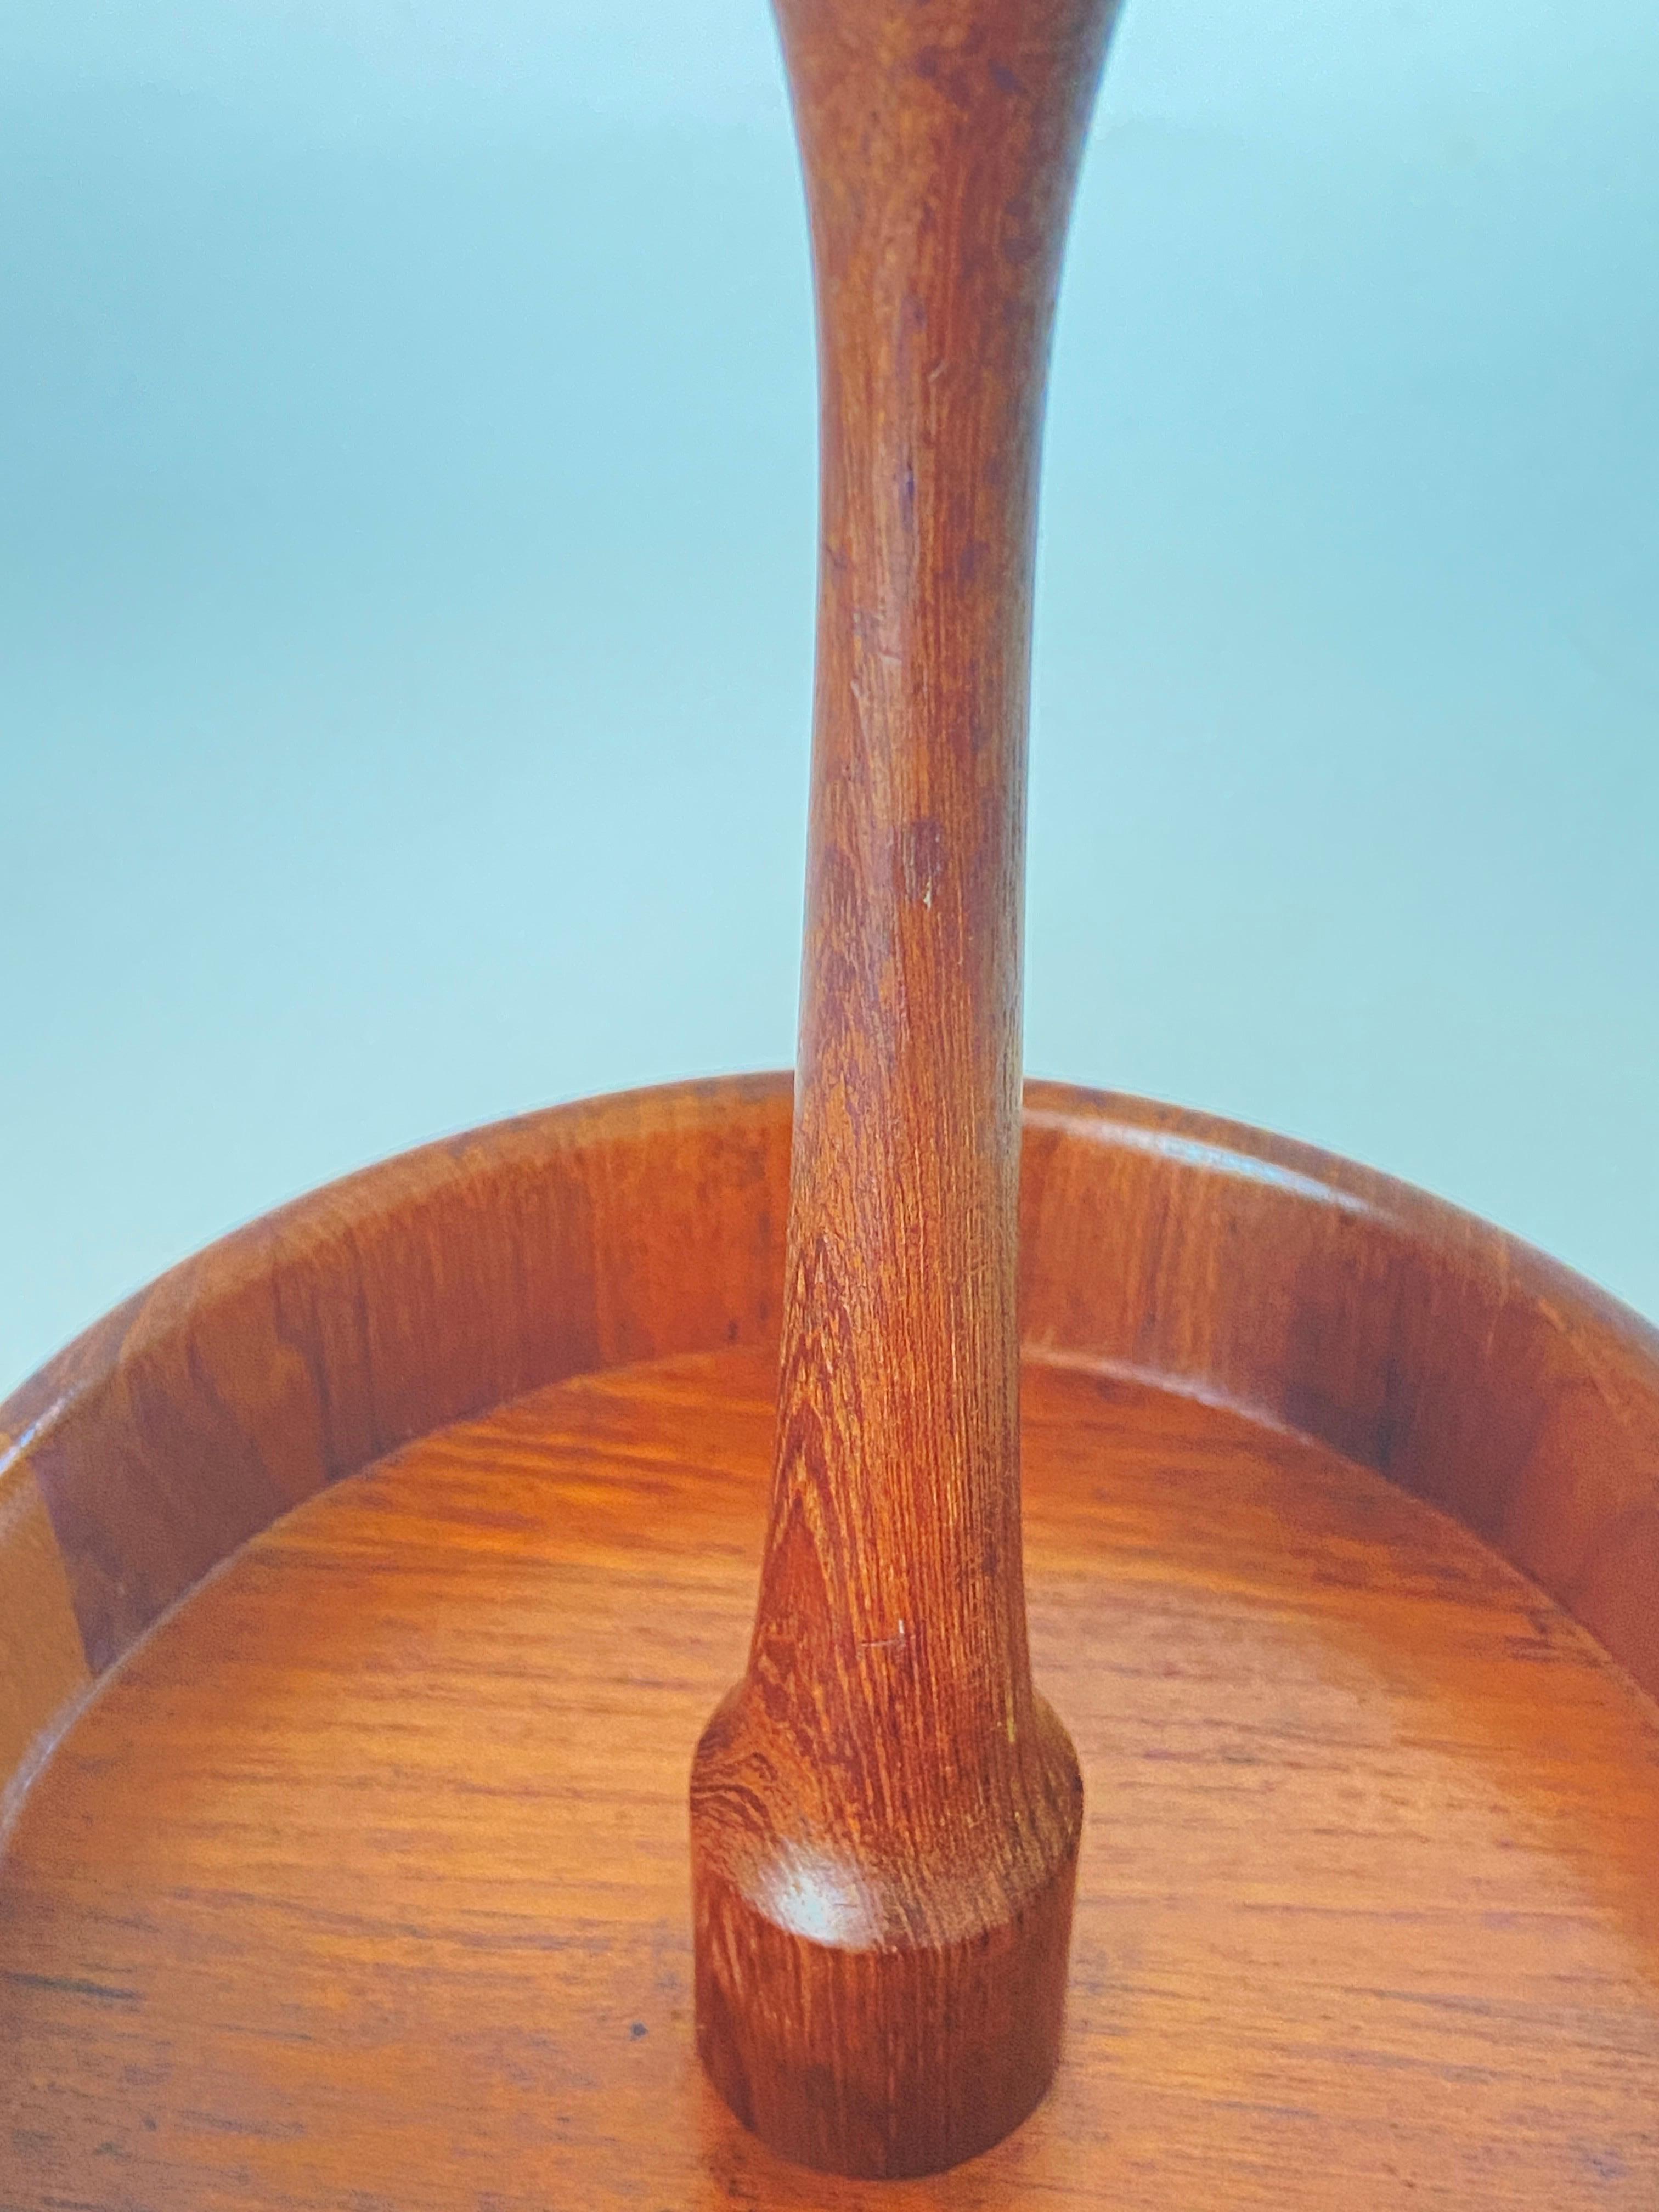 This Spice tray or platter is from Denmark. It has been made in the 1970s.
Brown Color.
With a Wooden Handle.